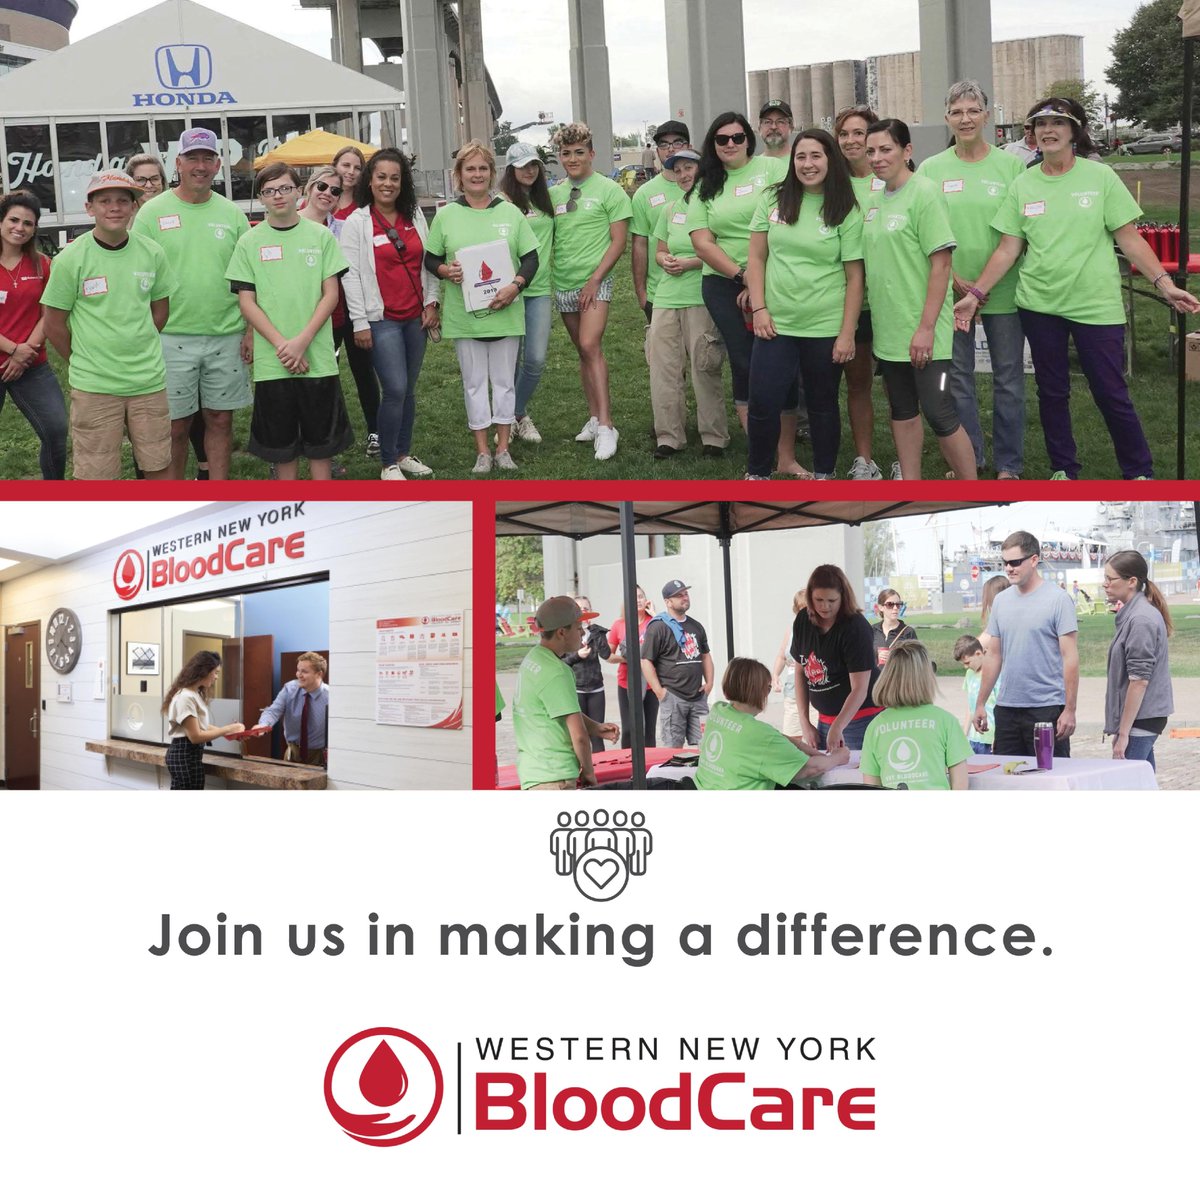 Western New York BloodCare is a non-profit organization focused on diagnosis and treatment of hemophilia and other blood disorders. Donate today using the link paypal.com/donate/?cmd=_s….